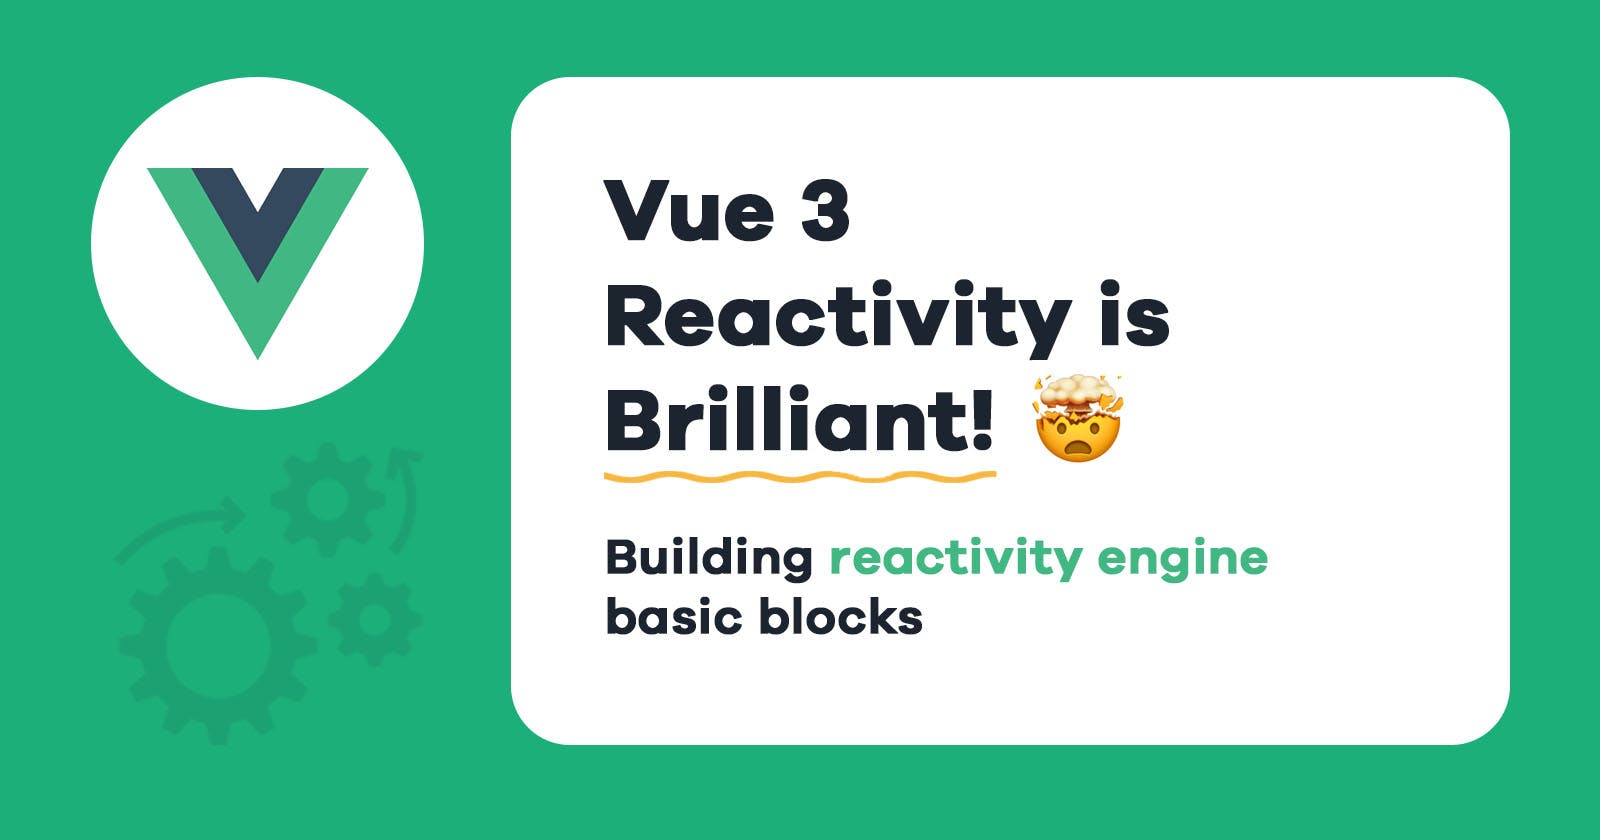 Vue 3 Reactivity System Is Brilliant! Here’s How It Works - Part 1